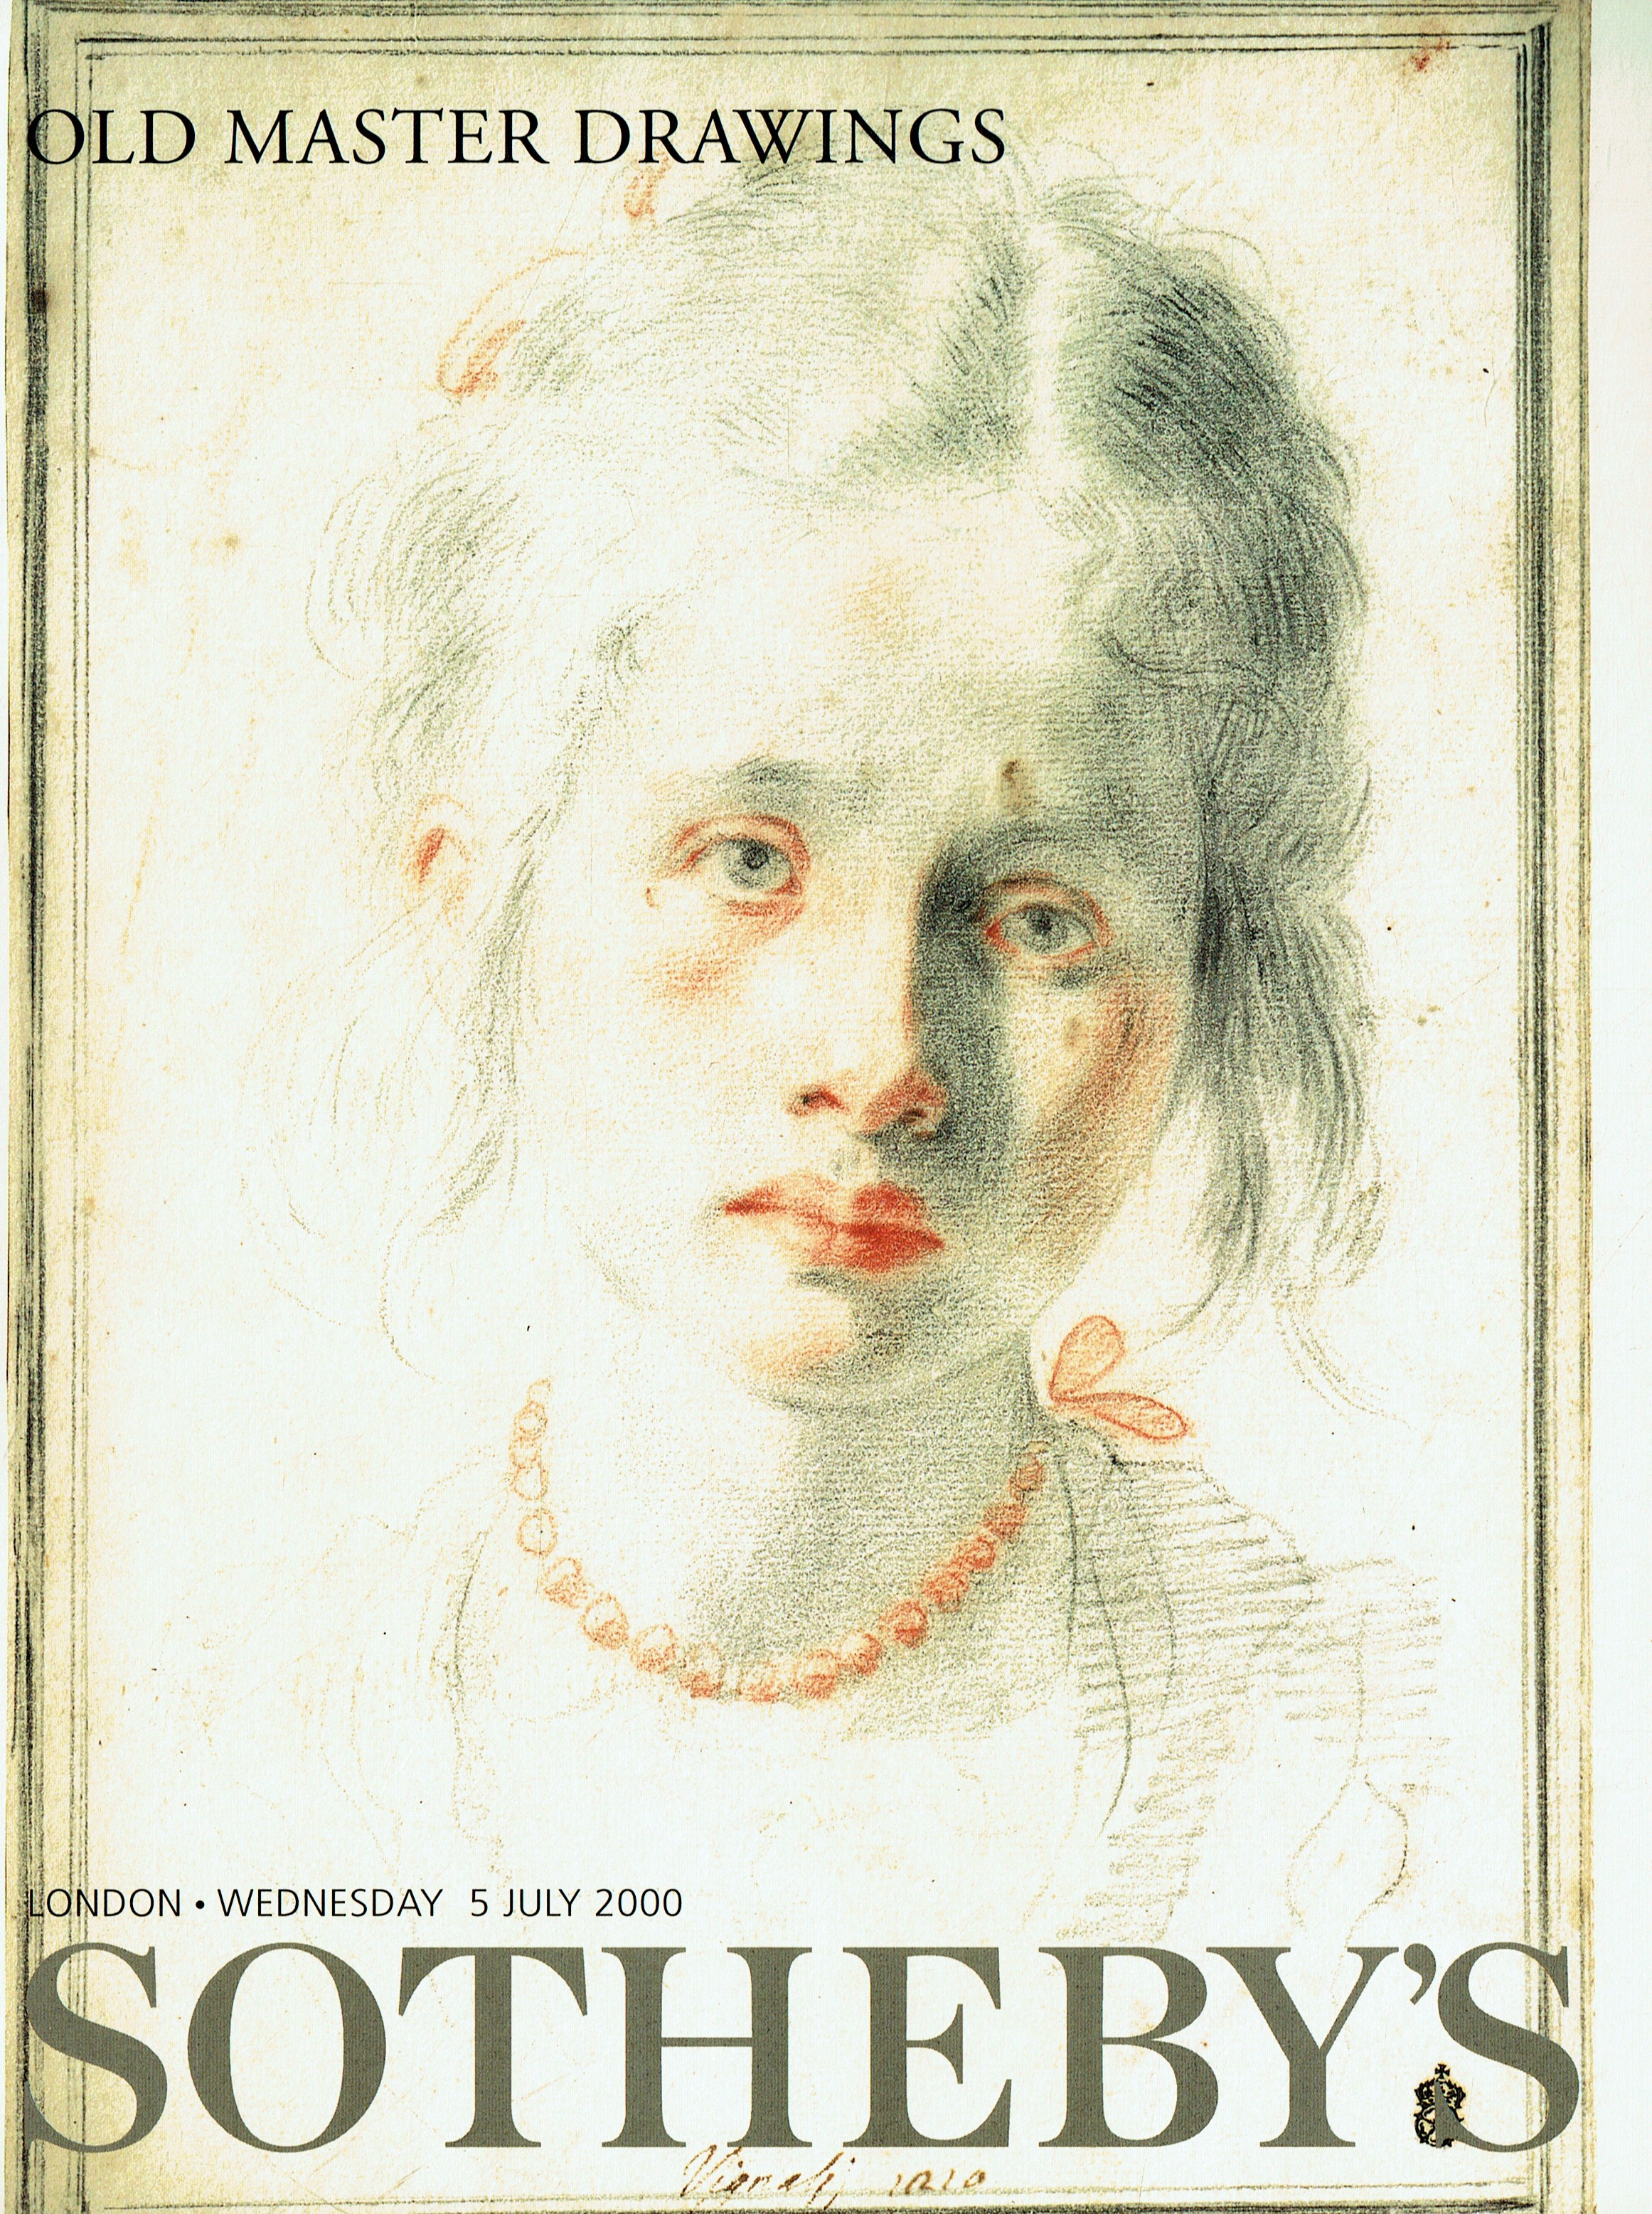 Sothebys July 2000 Old Master Drawings (Digitial Only)